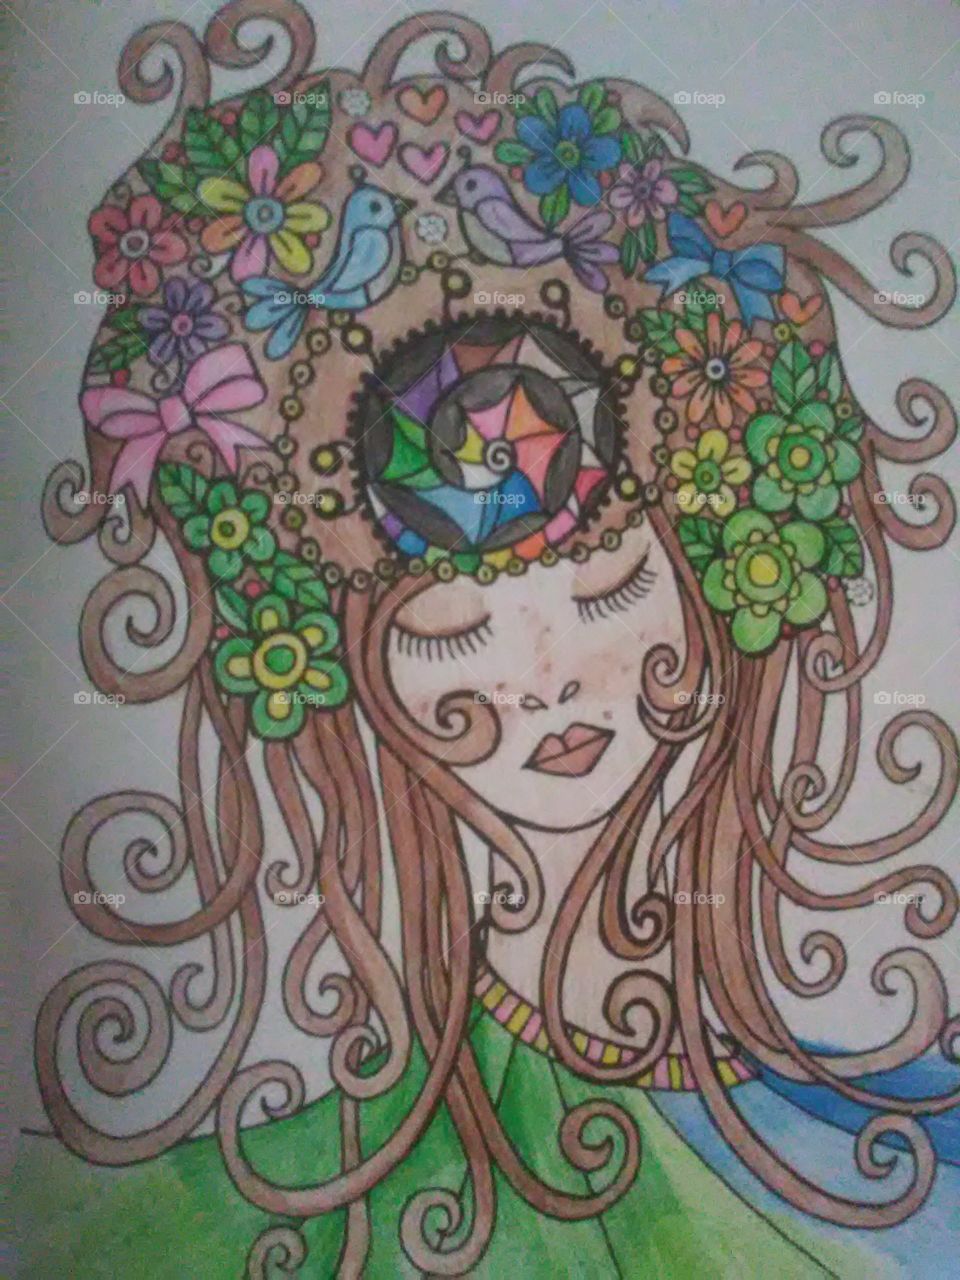 beautiful goddess of nature and love colored by me (Nicole) this free flowing goddess Wii help bring peace into your life.